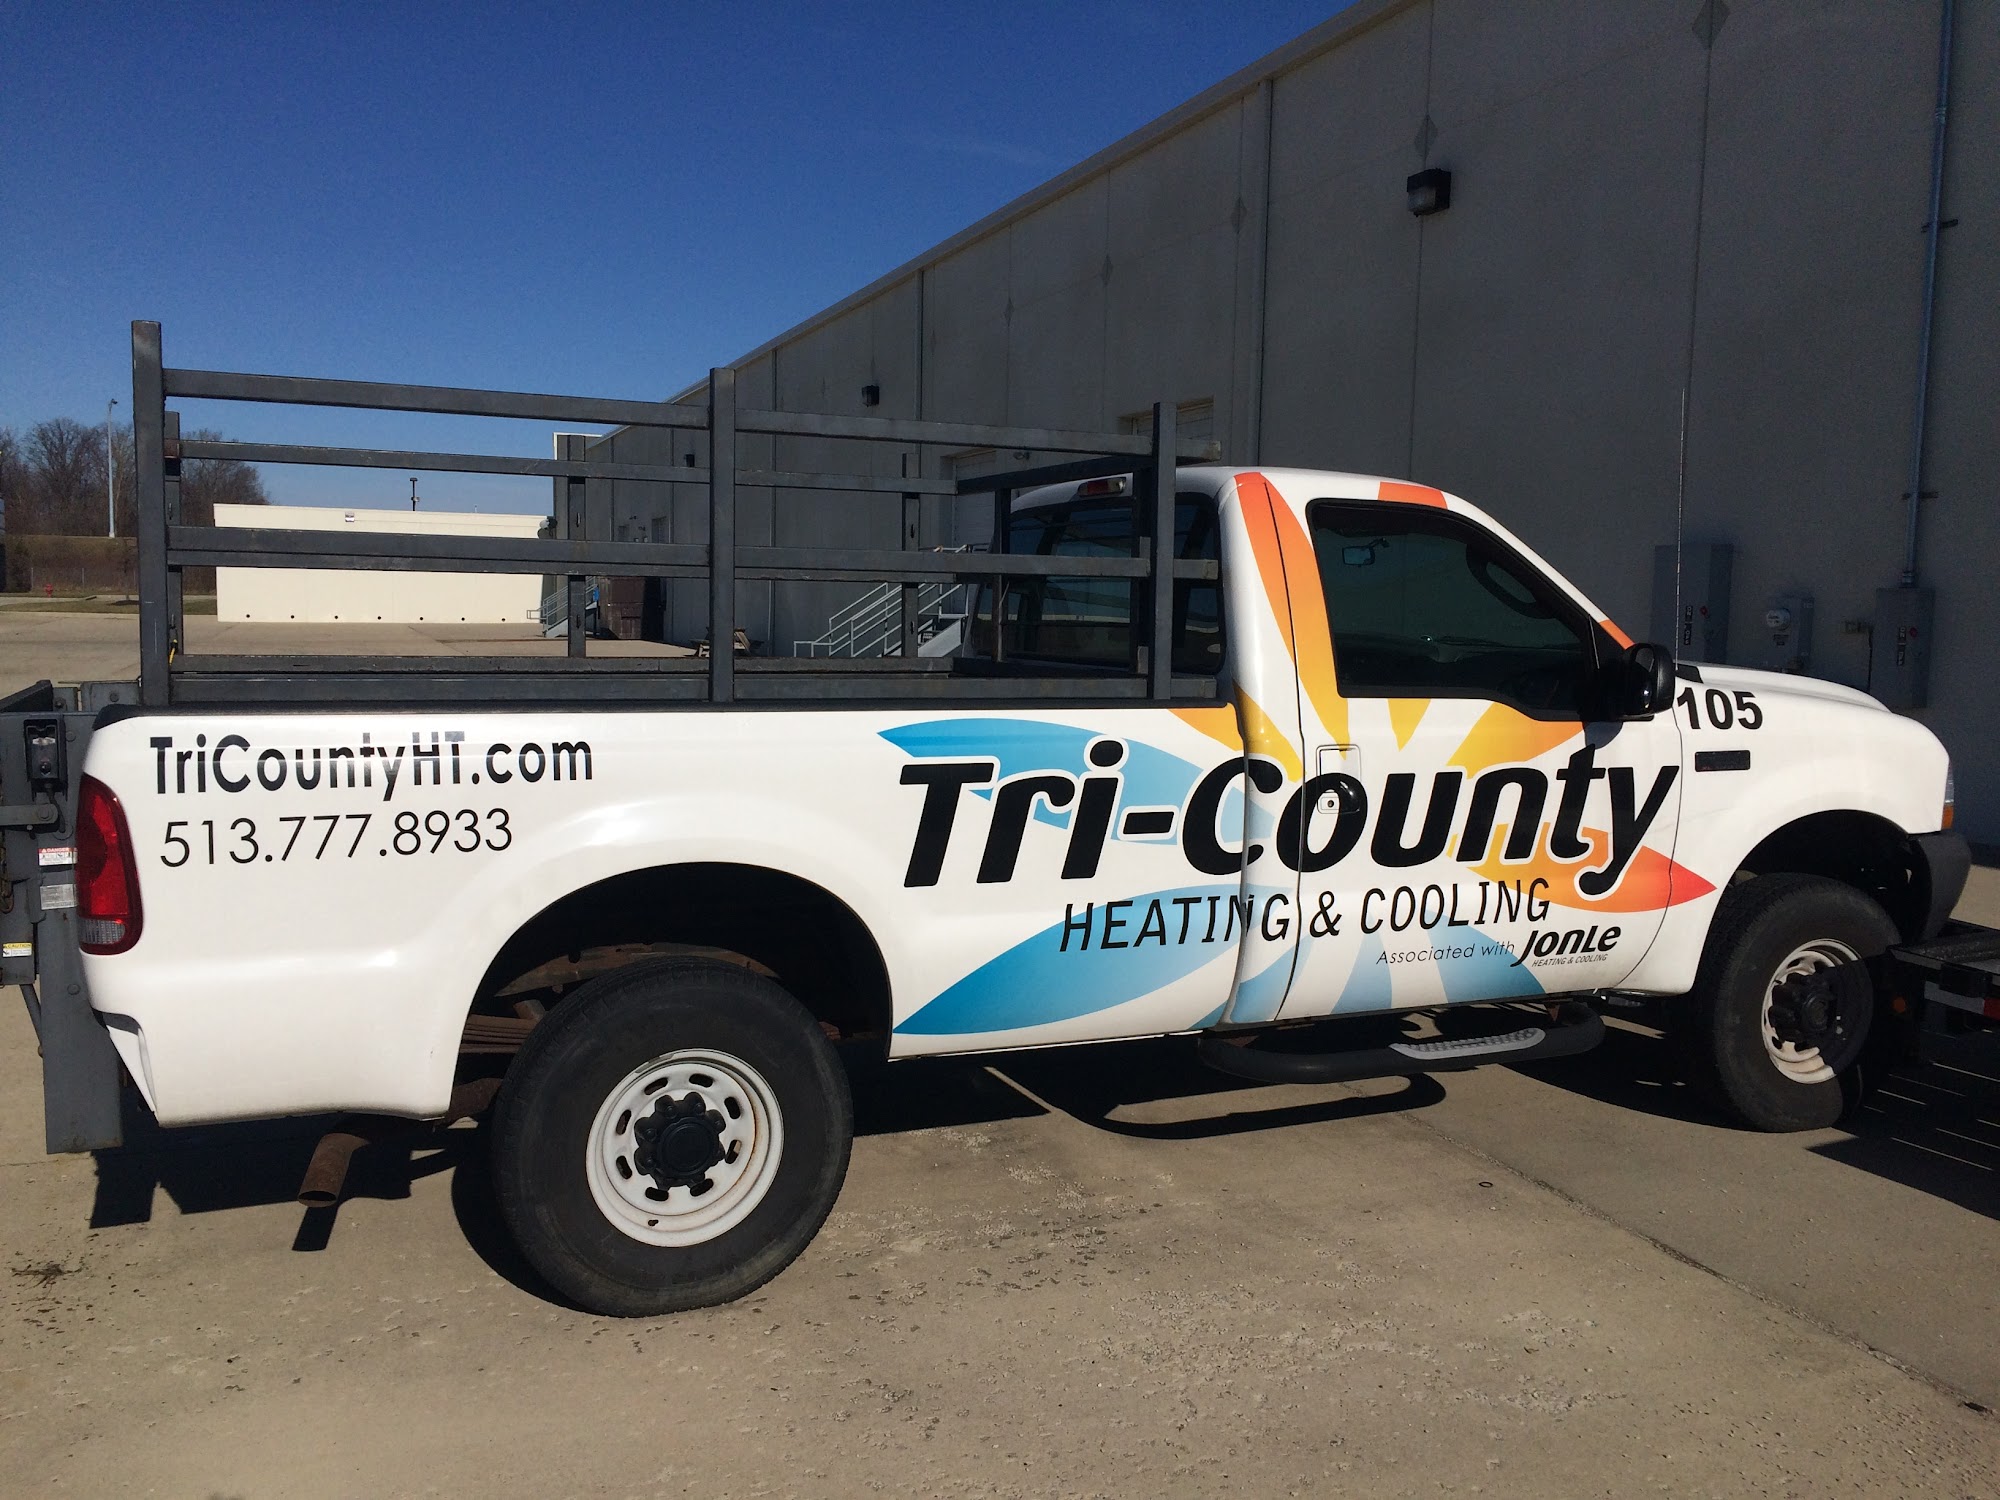 Tri-County Heating & Cooling